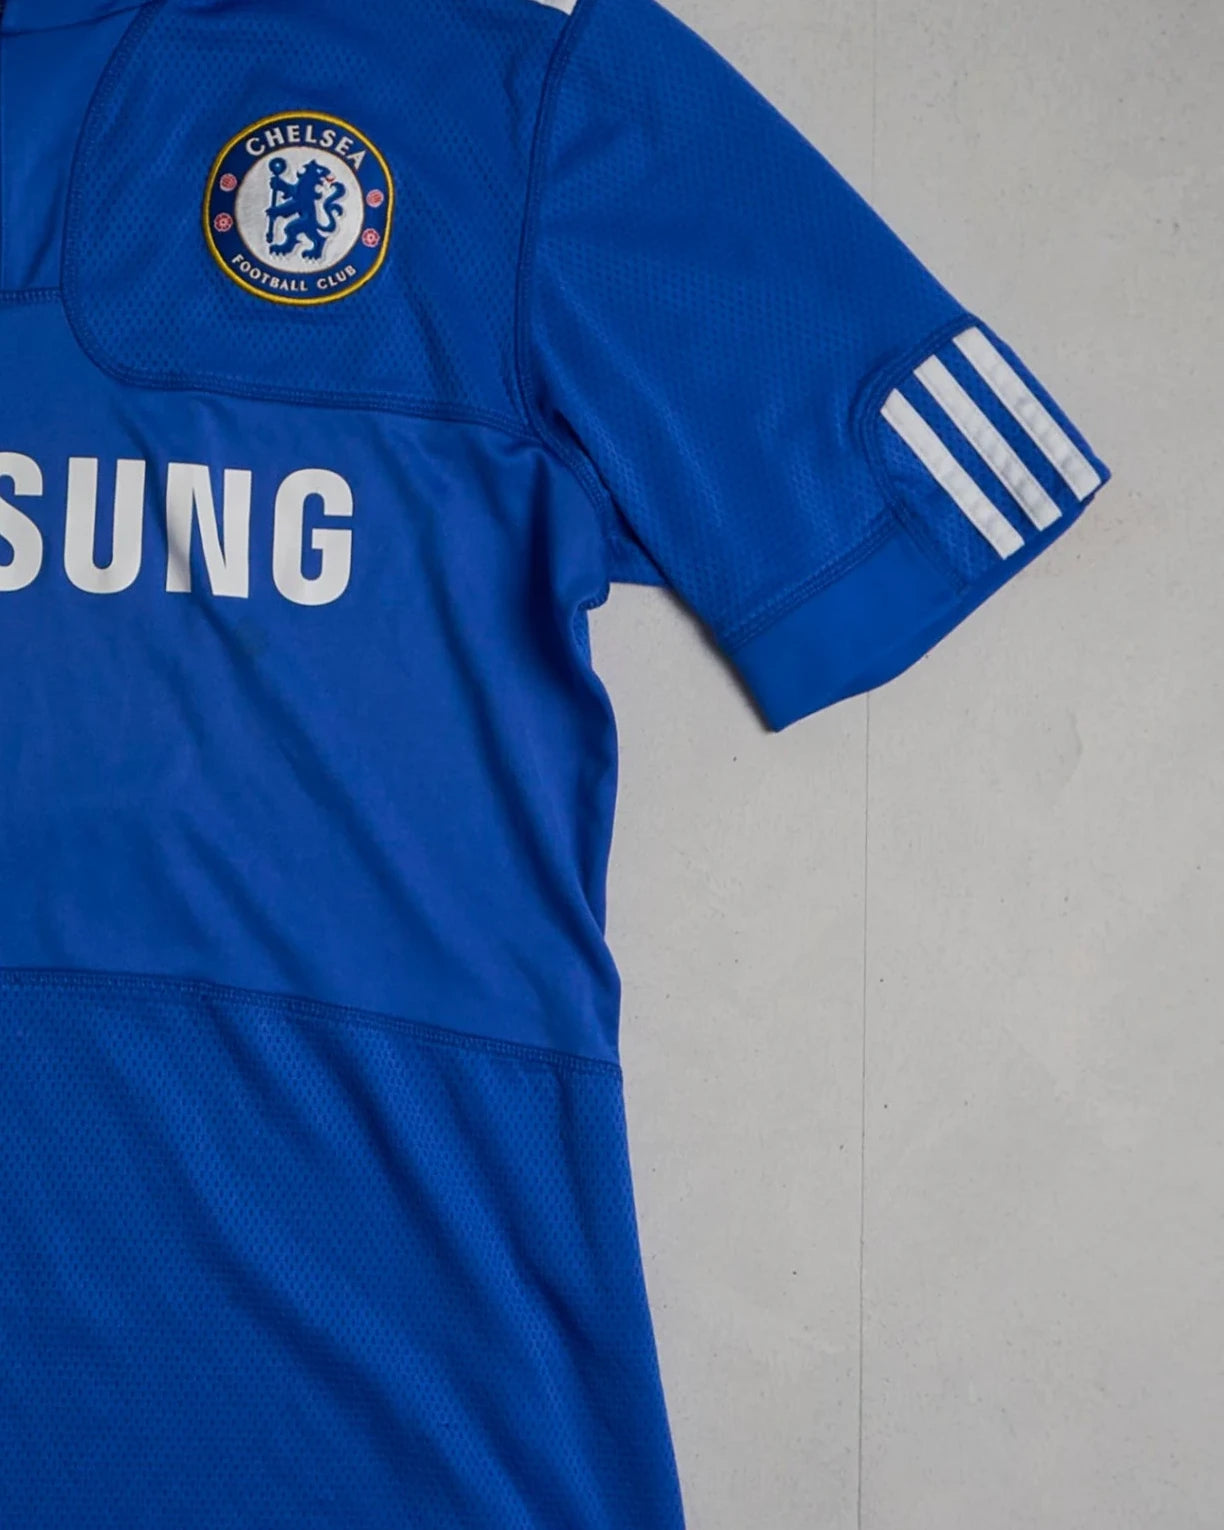 Vintage Chelsea Adidas Jersey Right